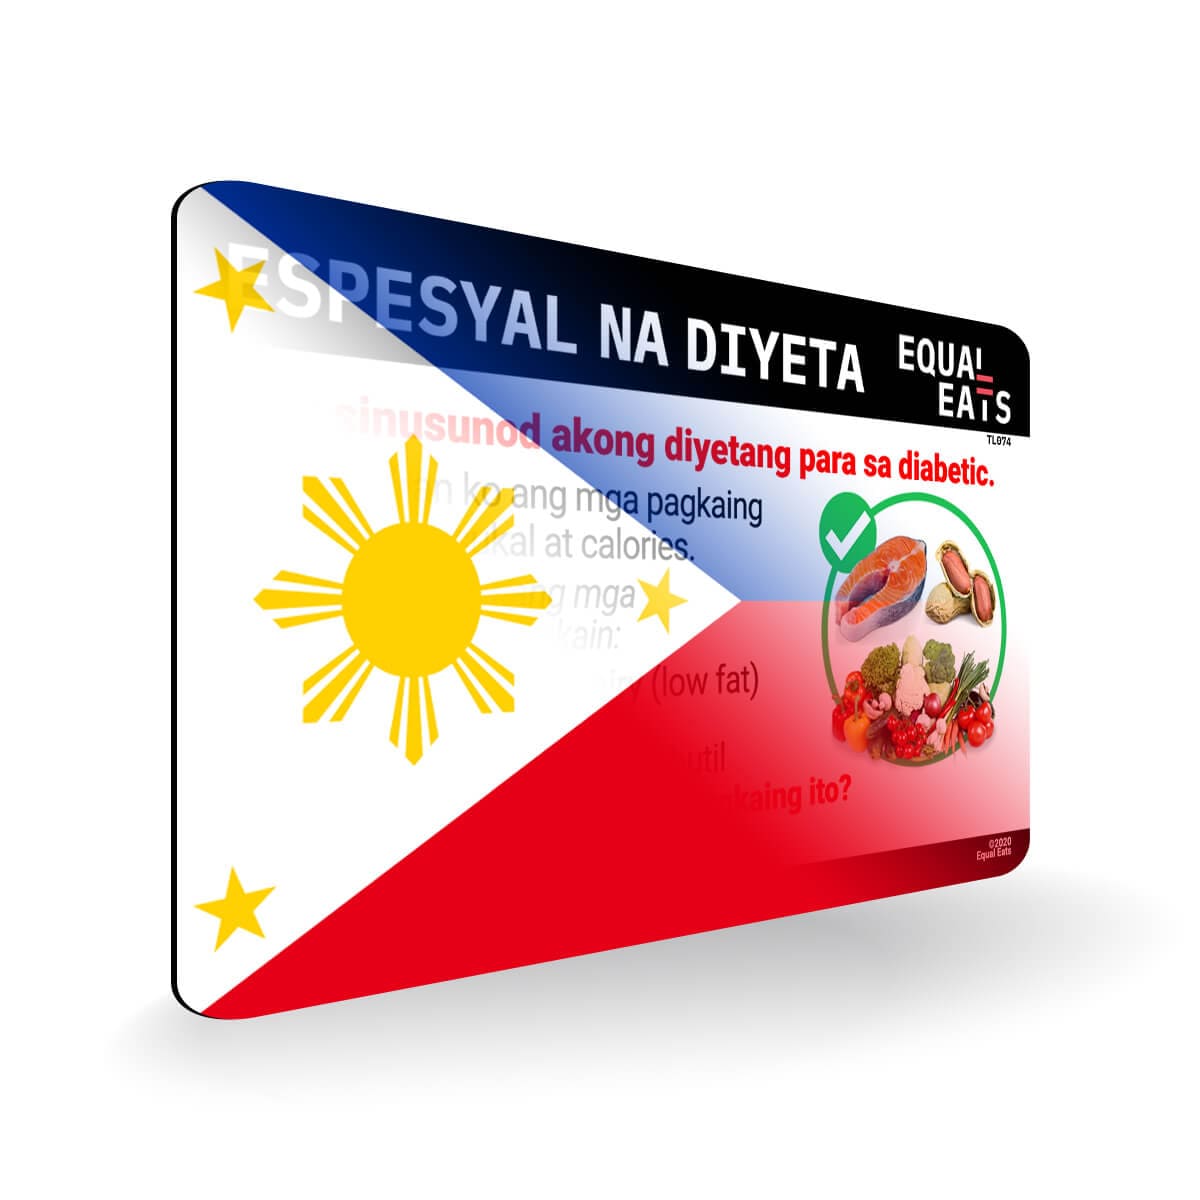 Diabetic Diet in Tagalog. Diabetes Card for Philippines Travel